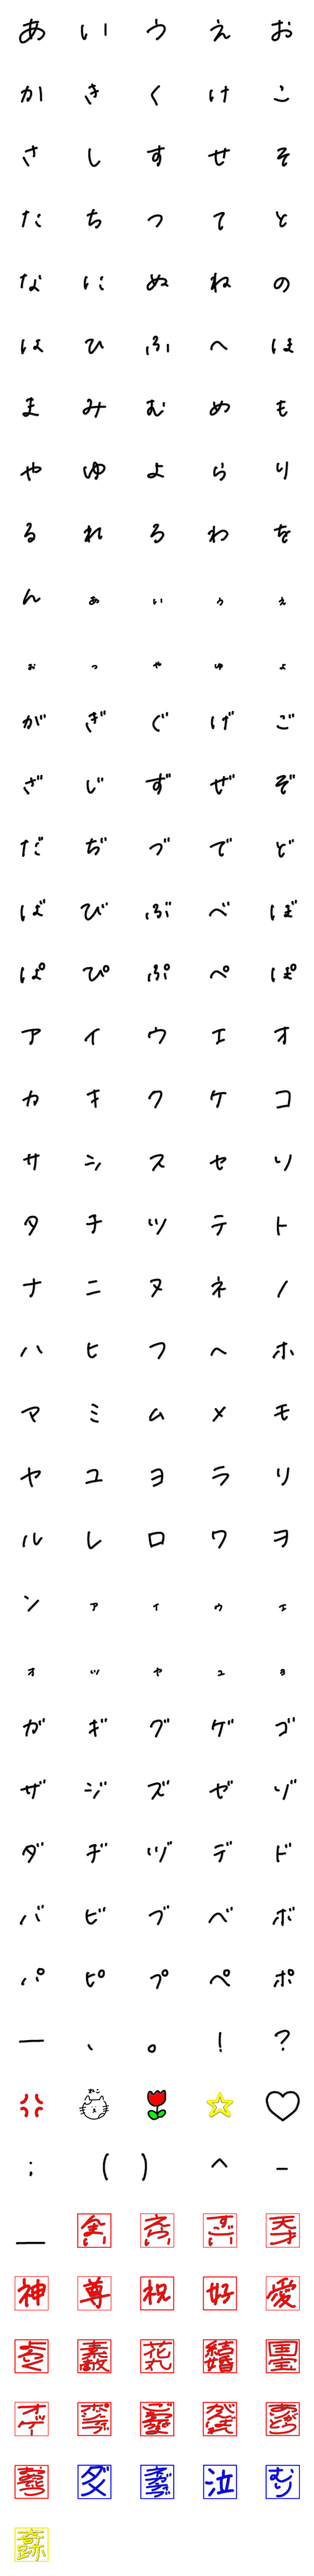 [LINE絵文字]たなかげ文字の画像一覧